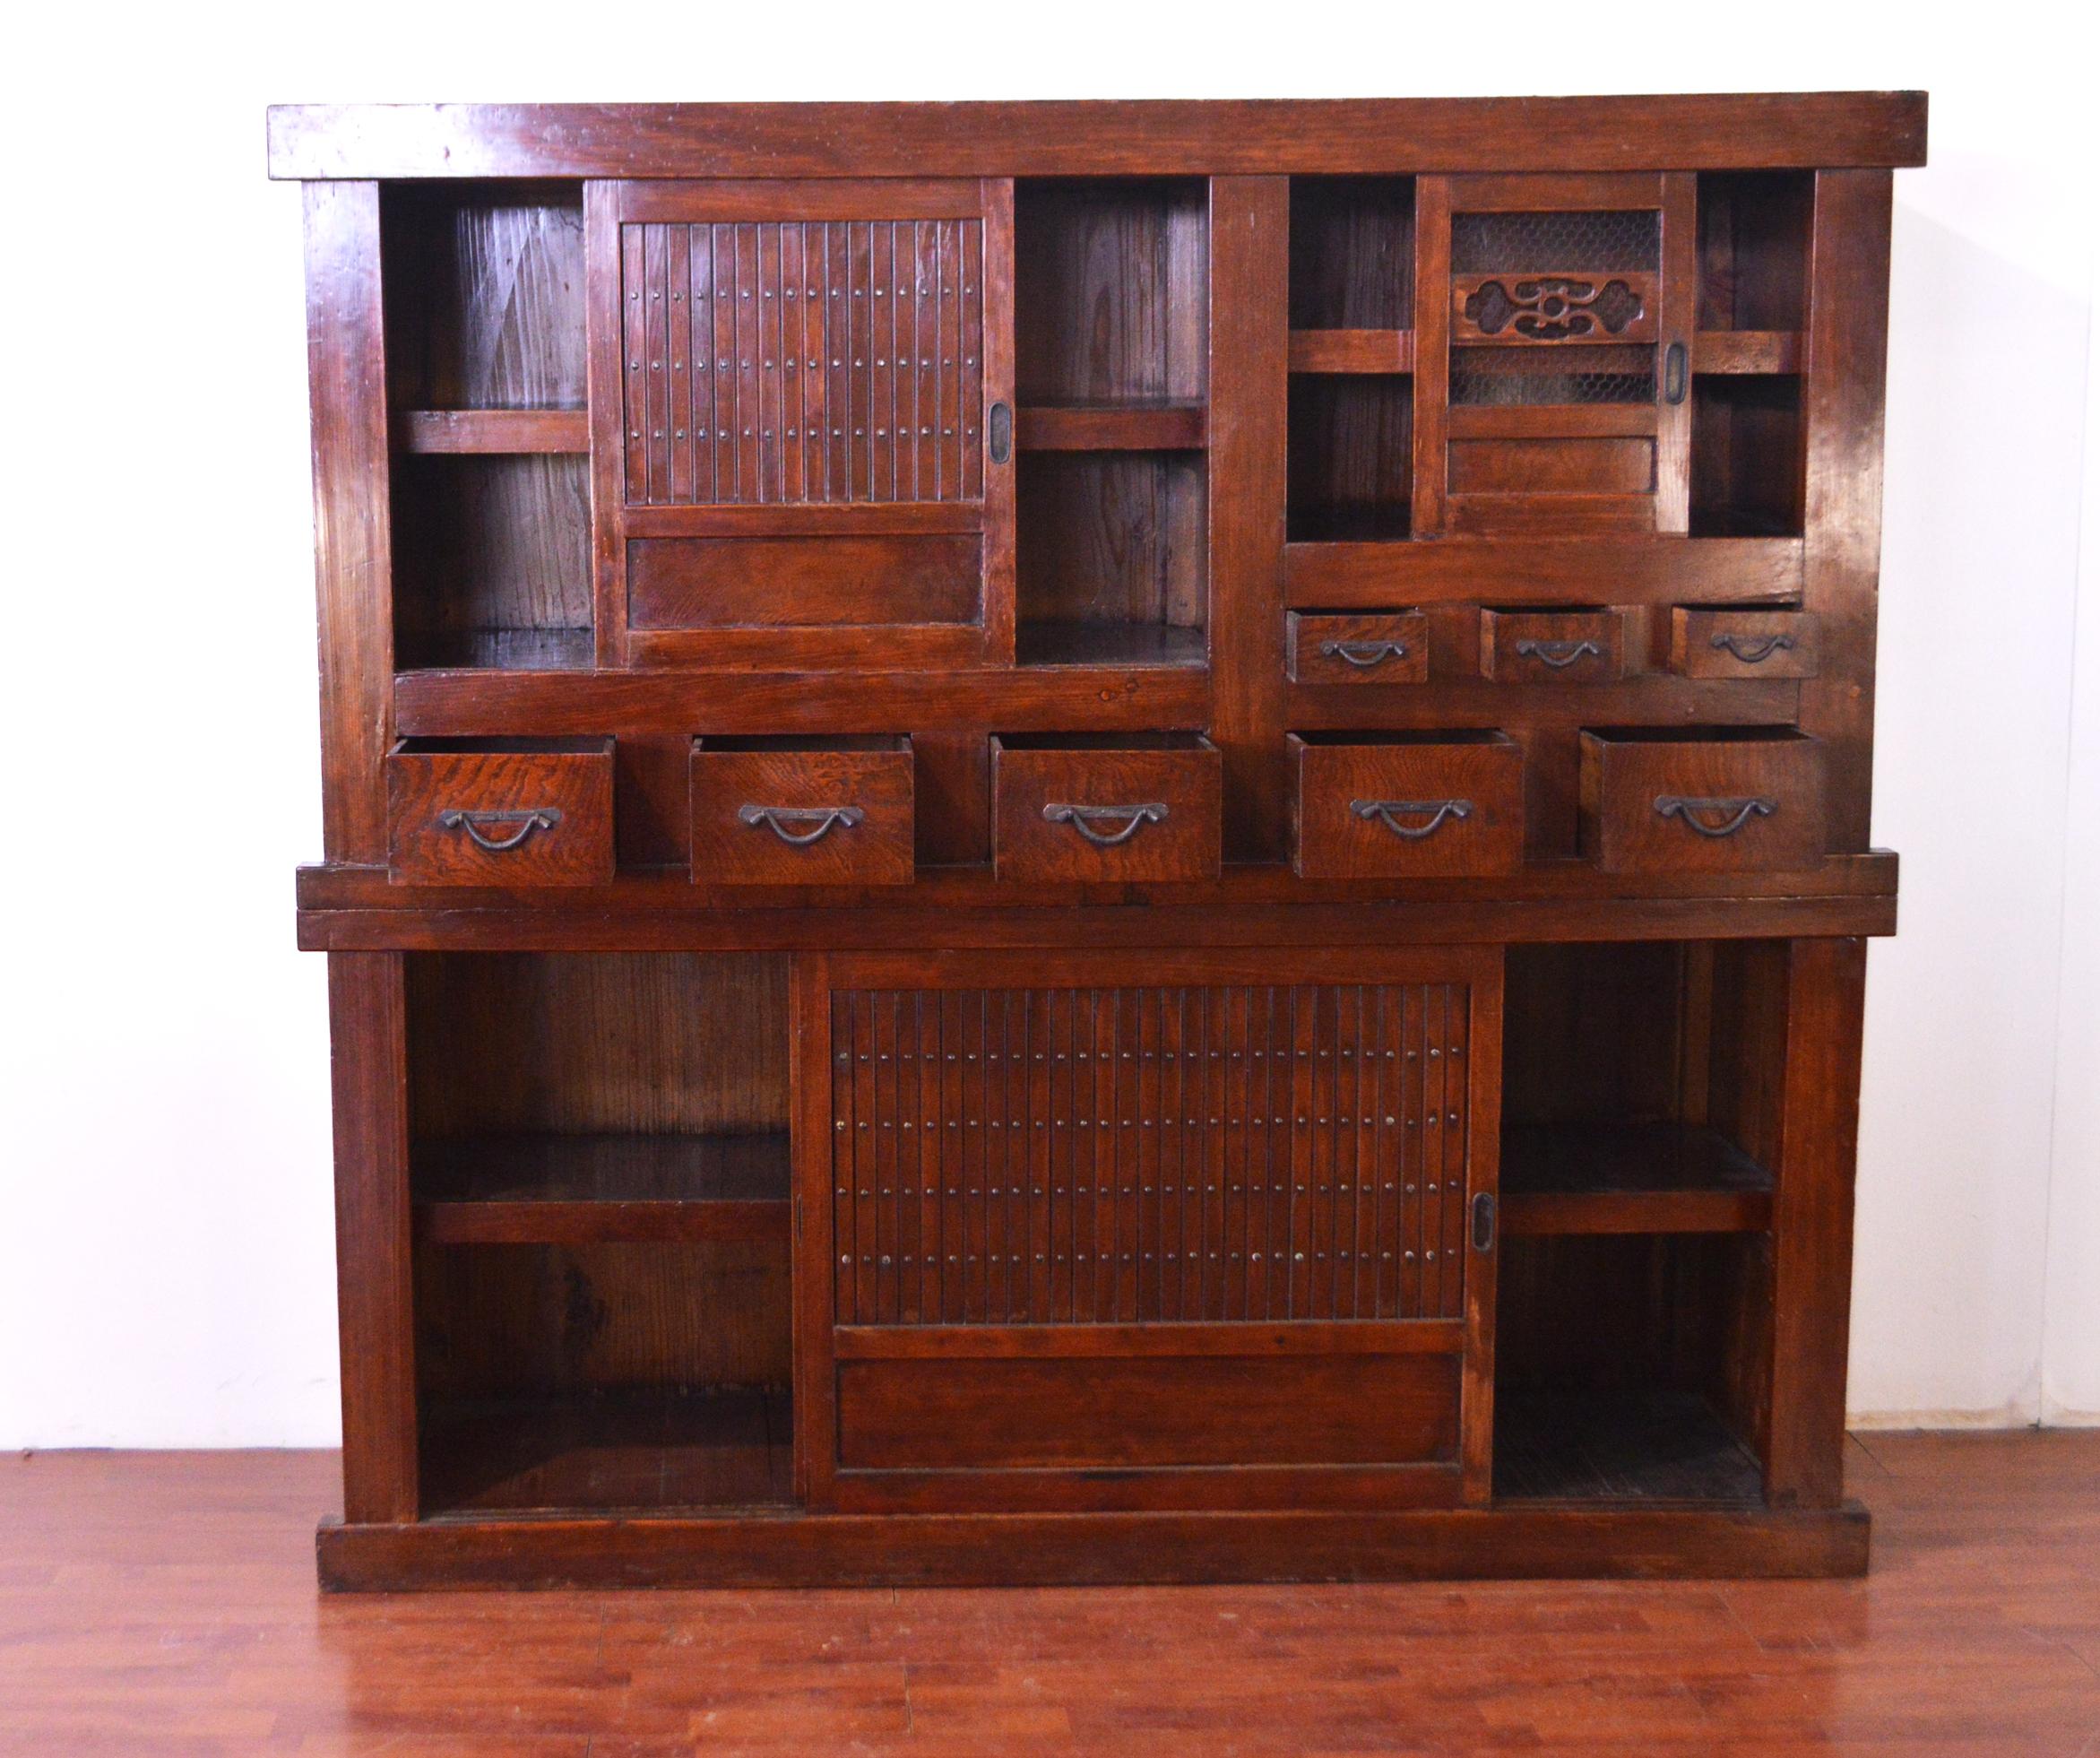 Elegant and with a Minimalist design late 19th century Japanese kitchen chest, typically called Mizuya Dansu. It is the most common term for two-section stacking kitchen chest. The lower part has two big sliding doors decorated with studs, while the